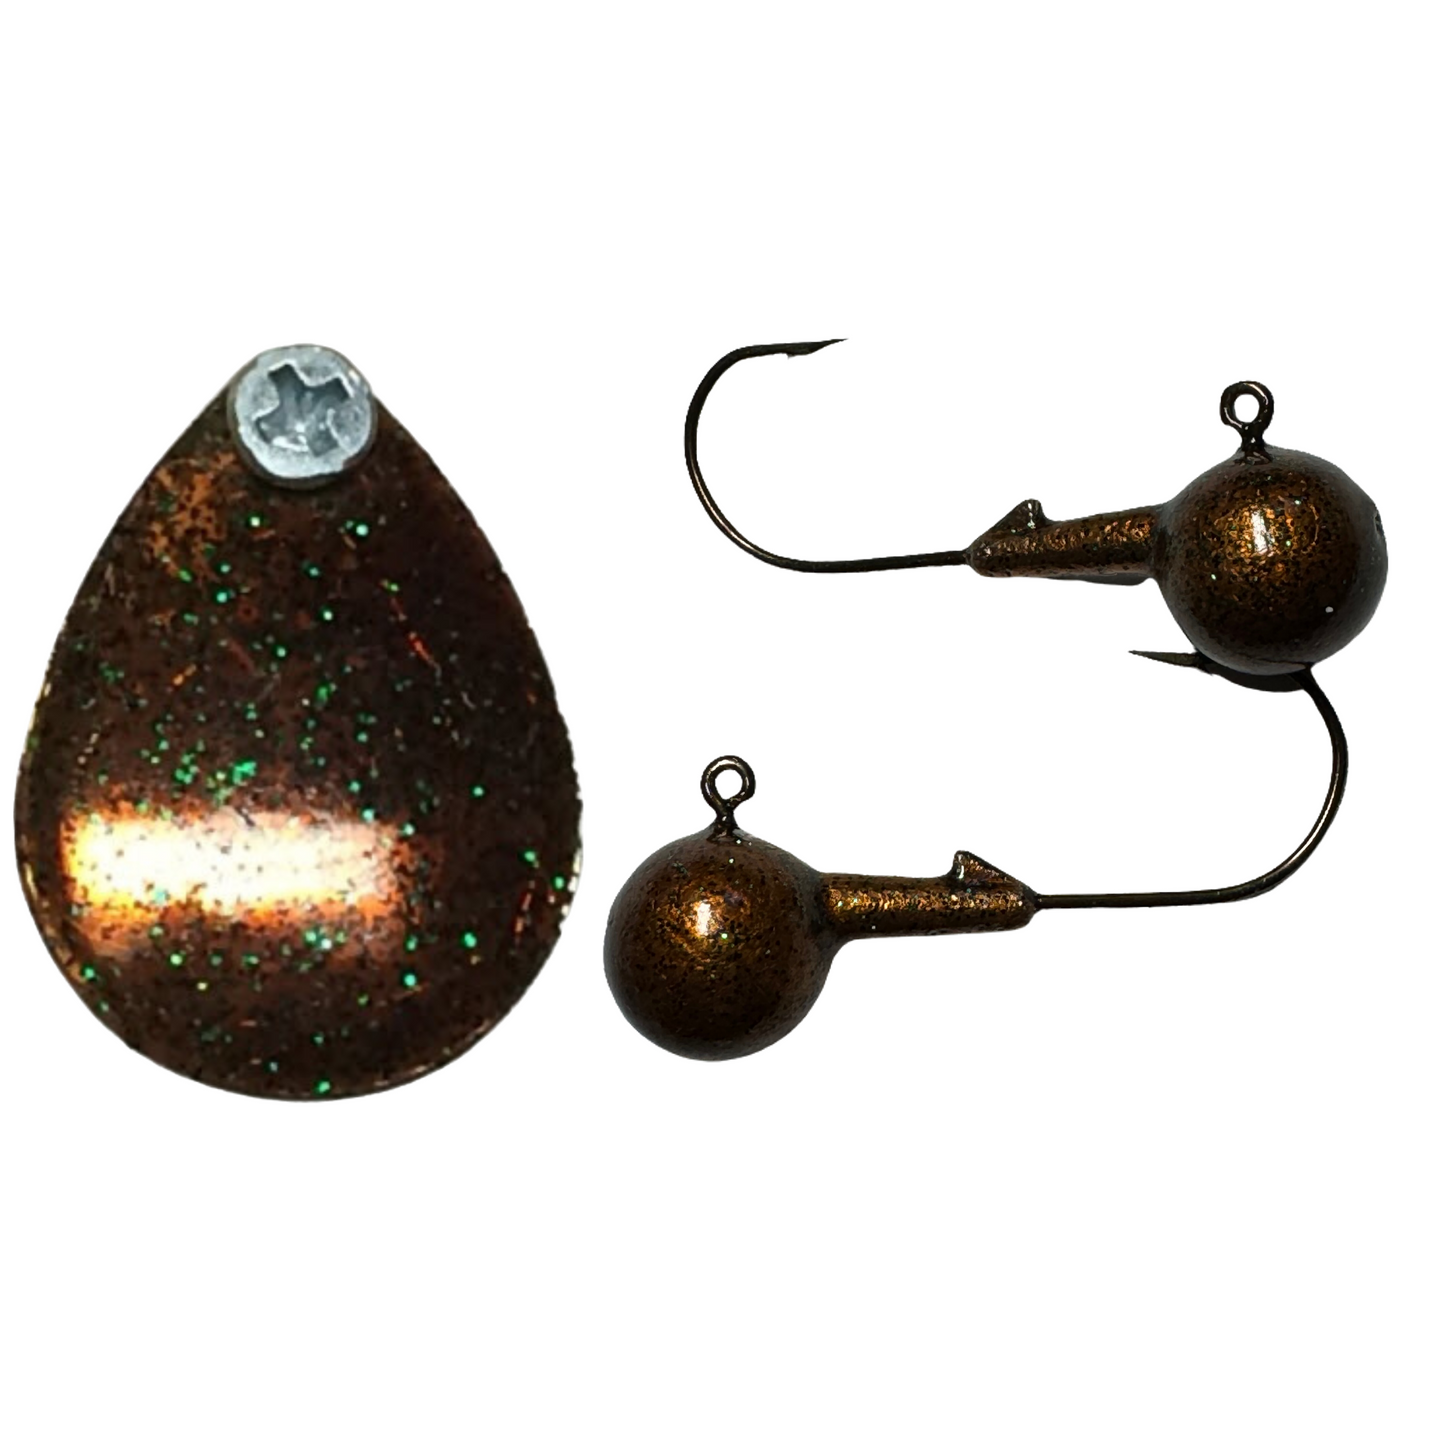 Round ball jig with bait keeper lead free copperhead color bronze and brown